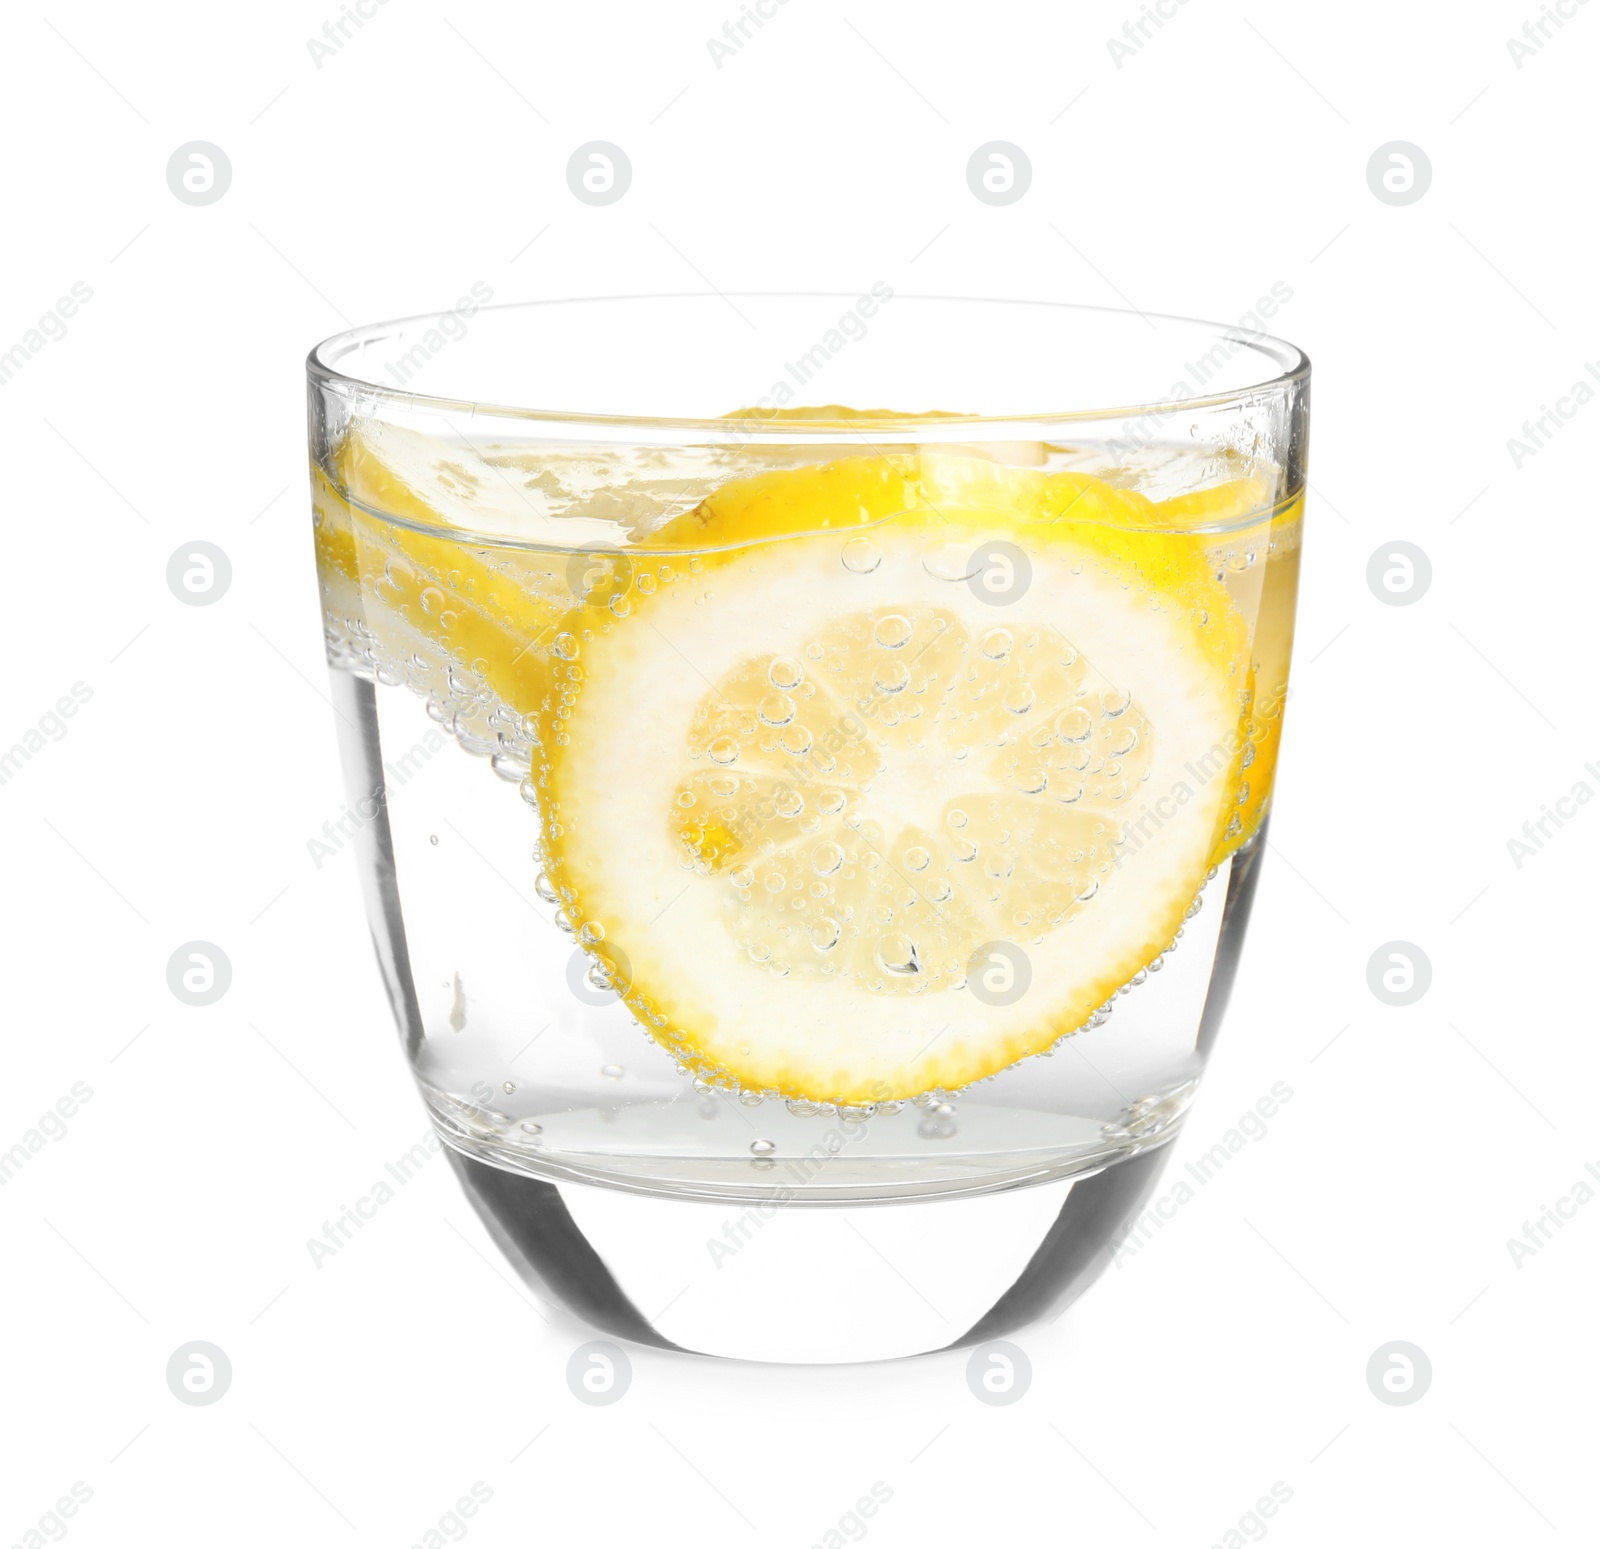 Photo of Soda water with lemon slices isolated on white